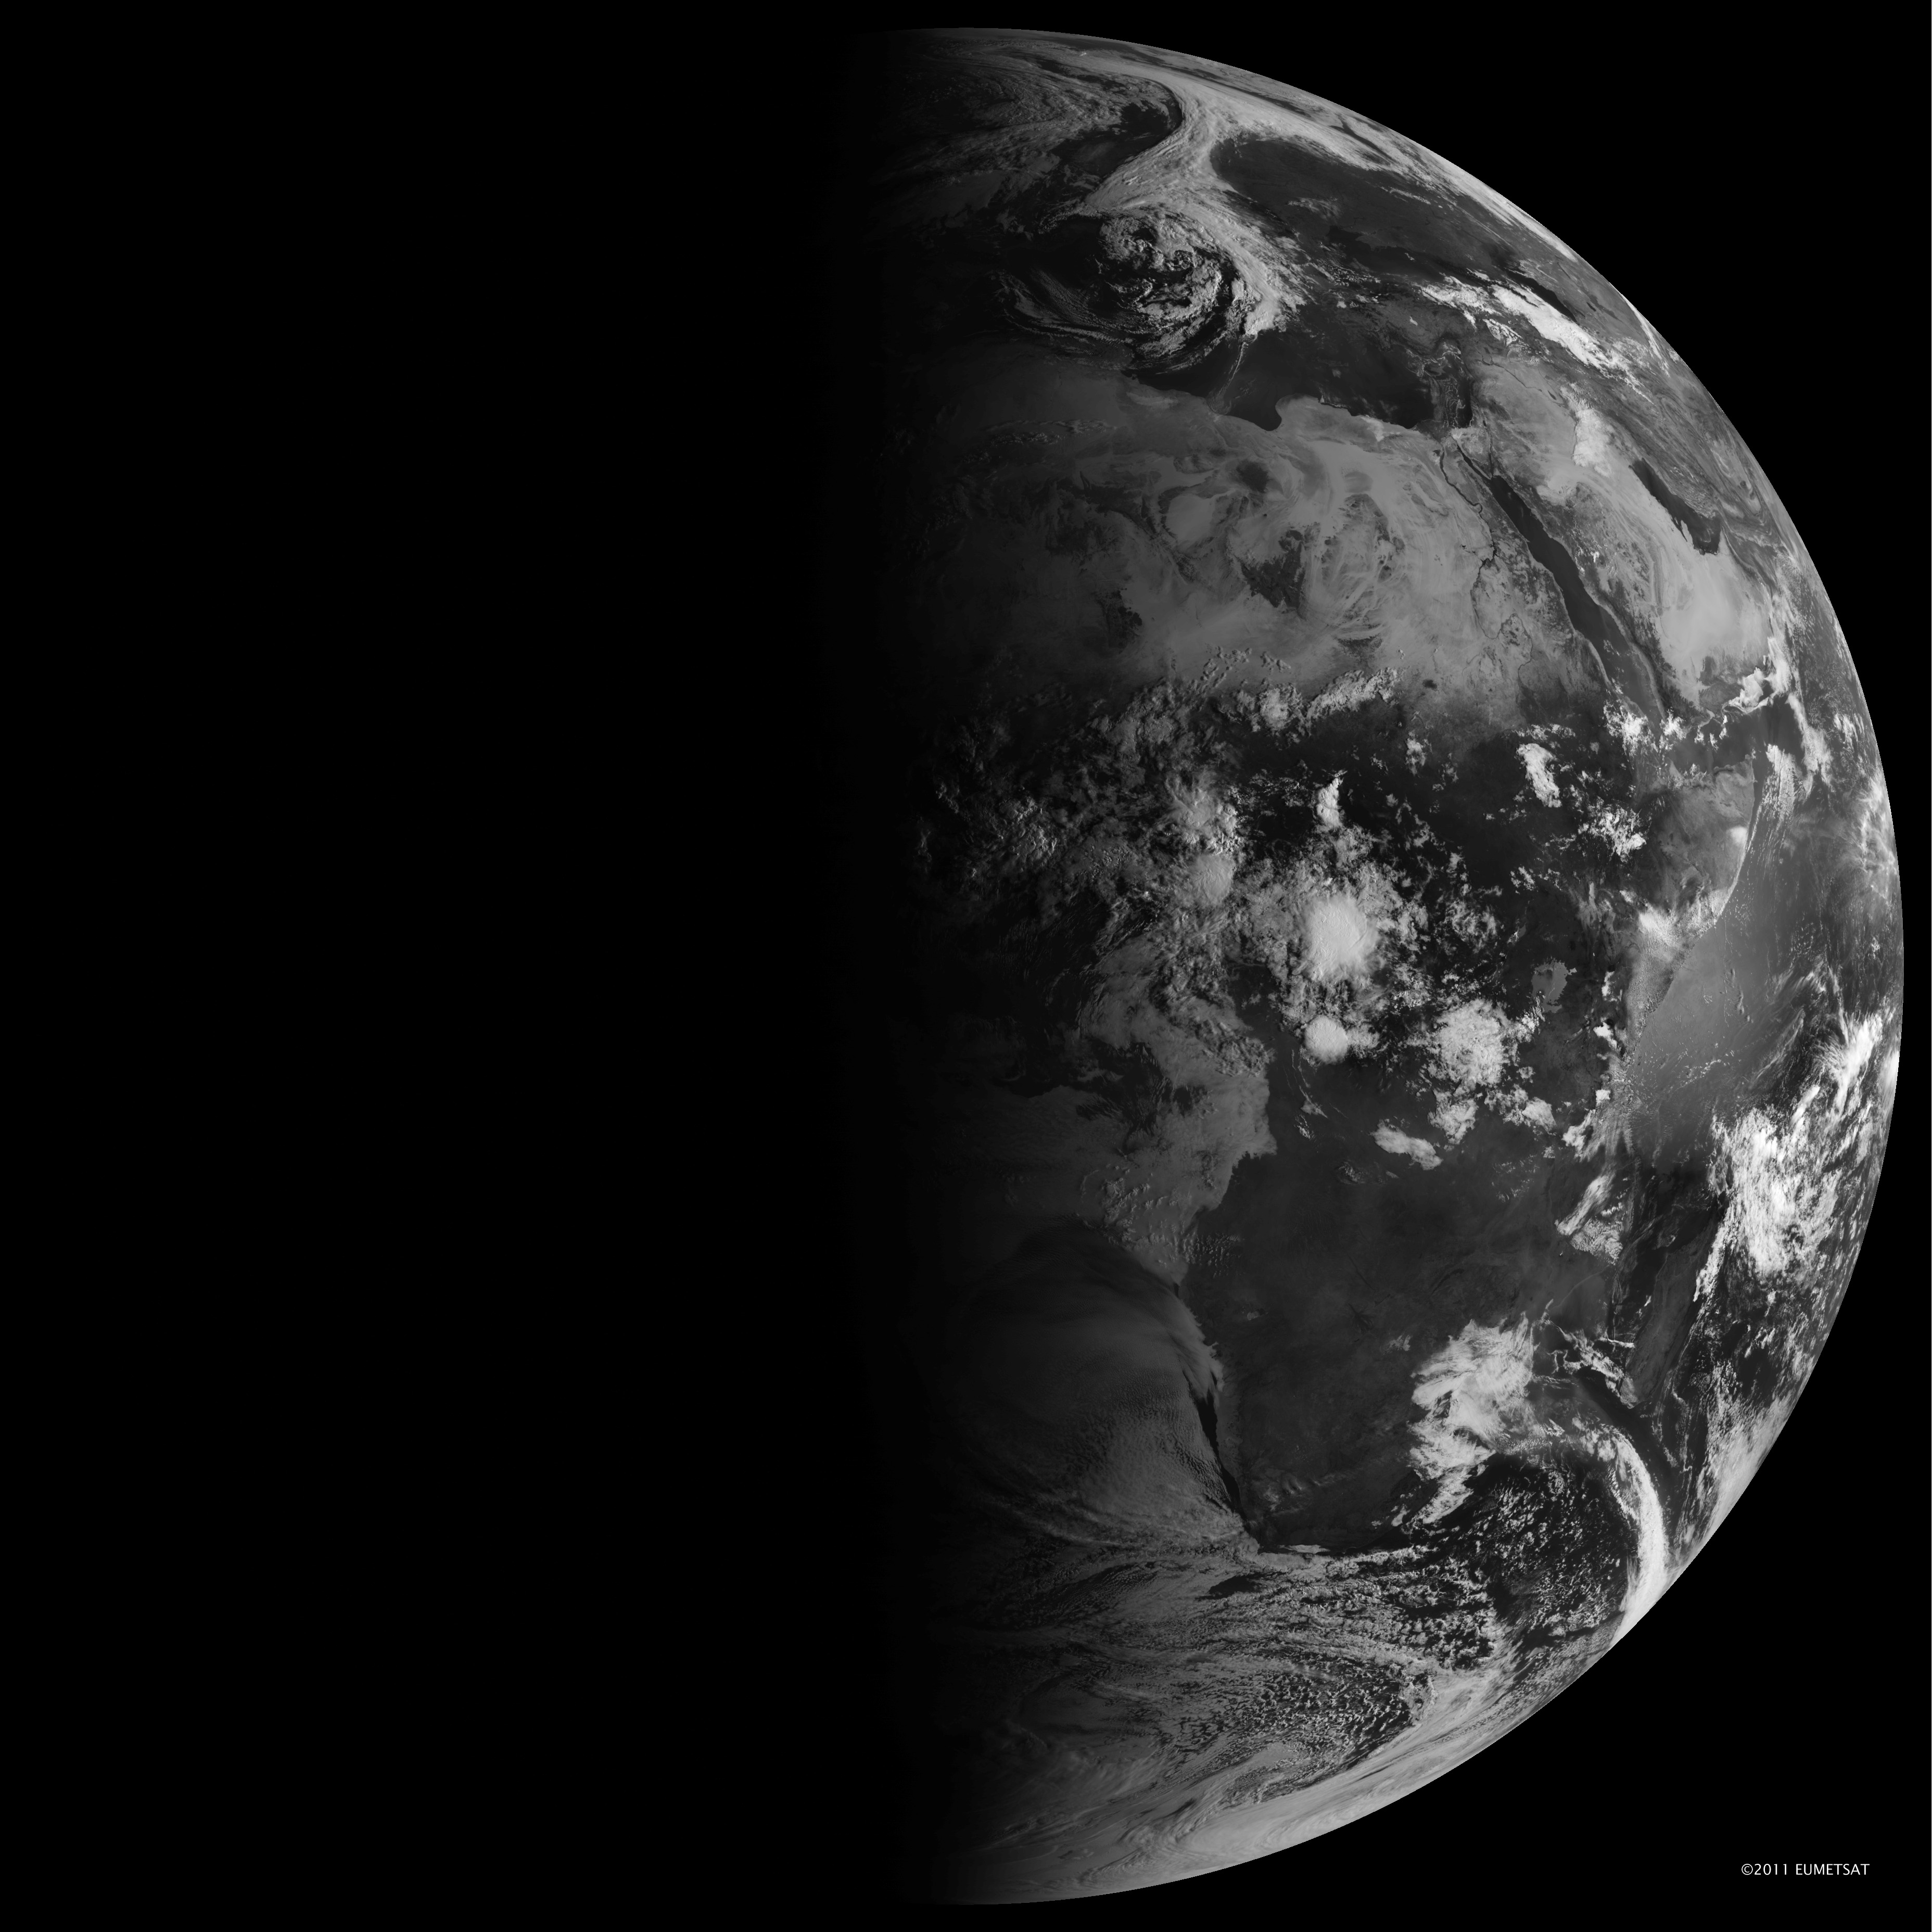 What’s Up: Autumnal Equinox Coming Up on September 22nd